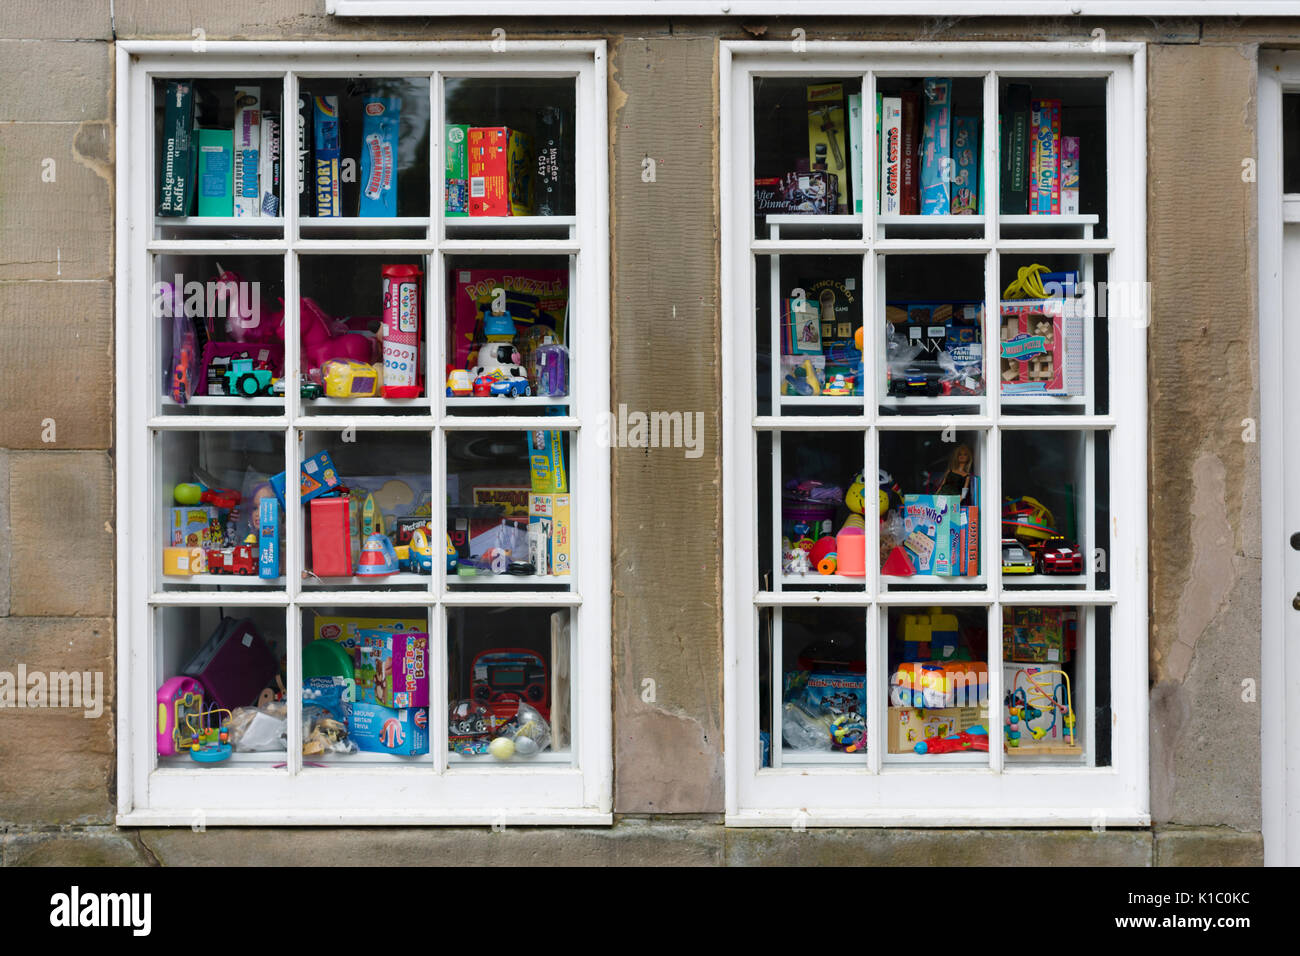 Charity Shop Toys High Resolution Stock Photography and Images - Alamy